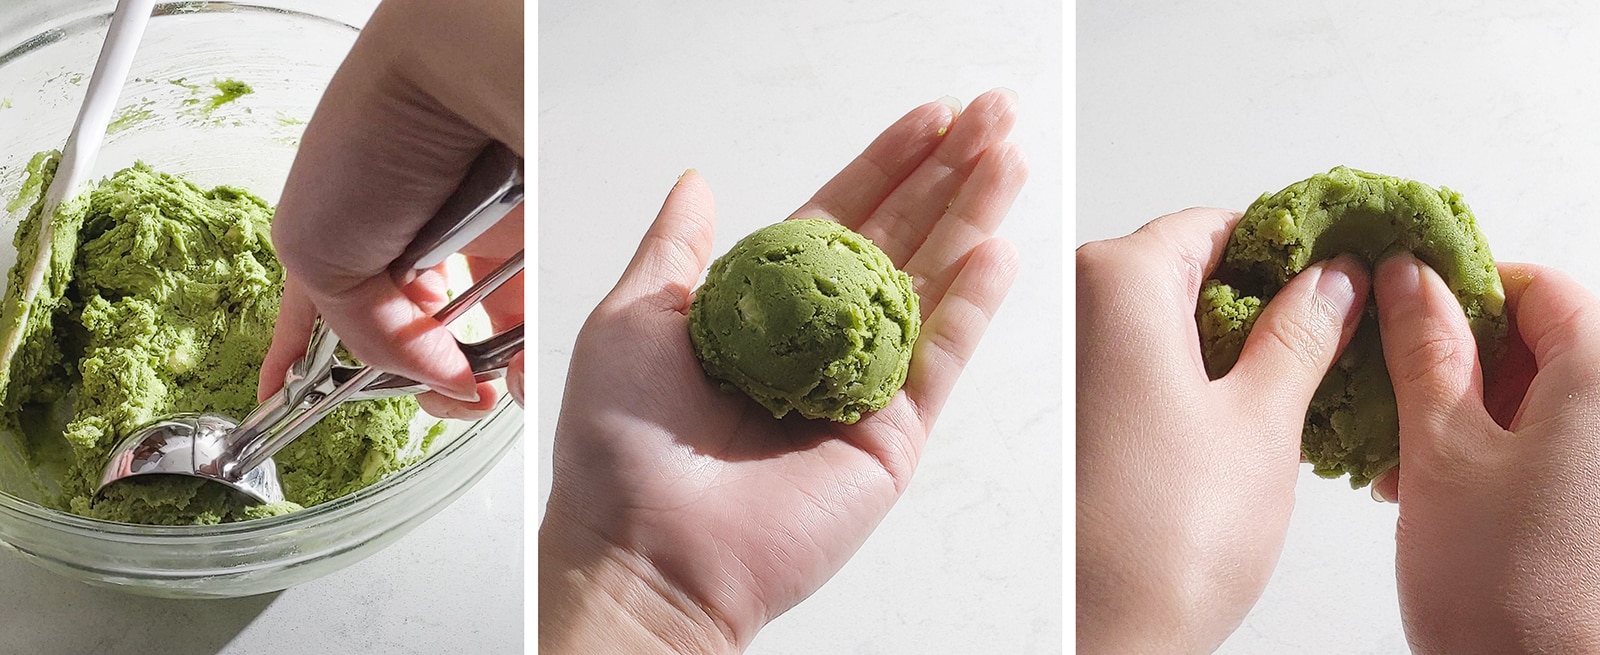 Shaping a ball of cookie dough in hands.